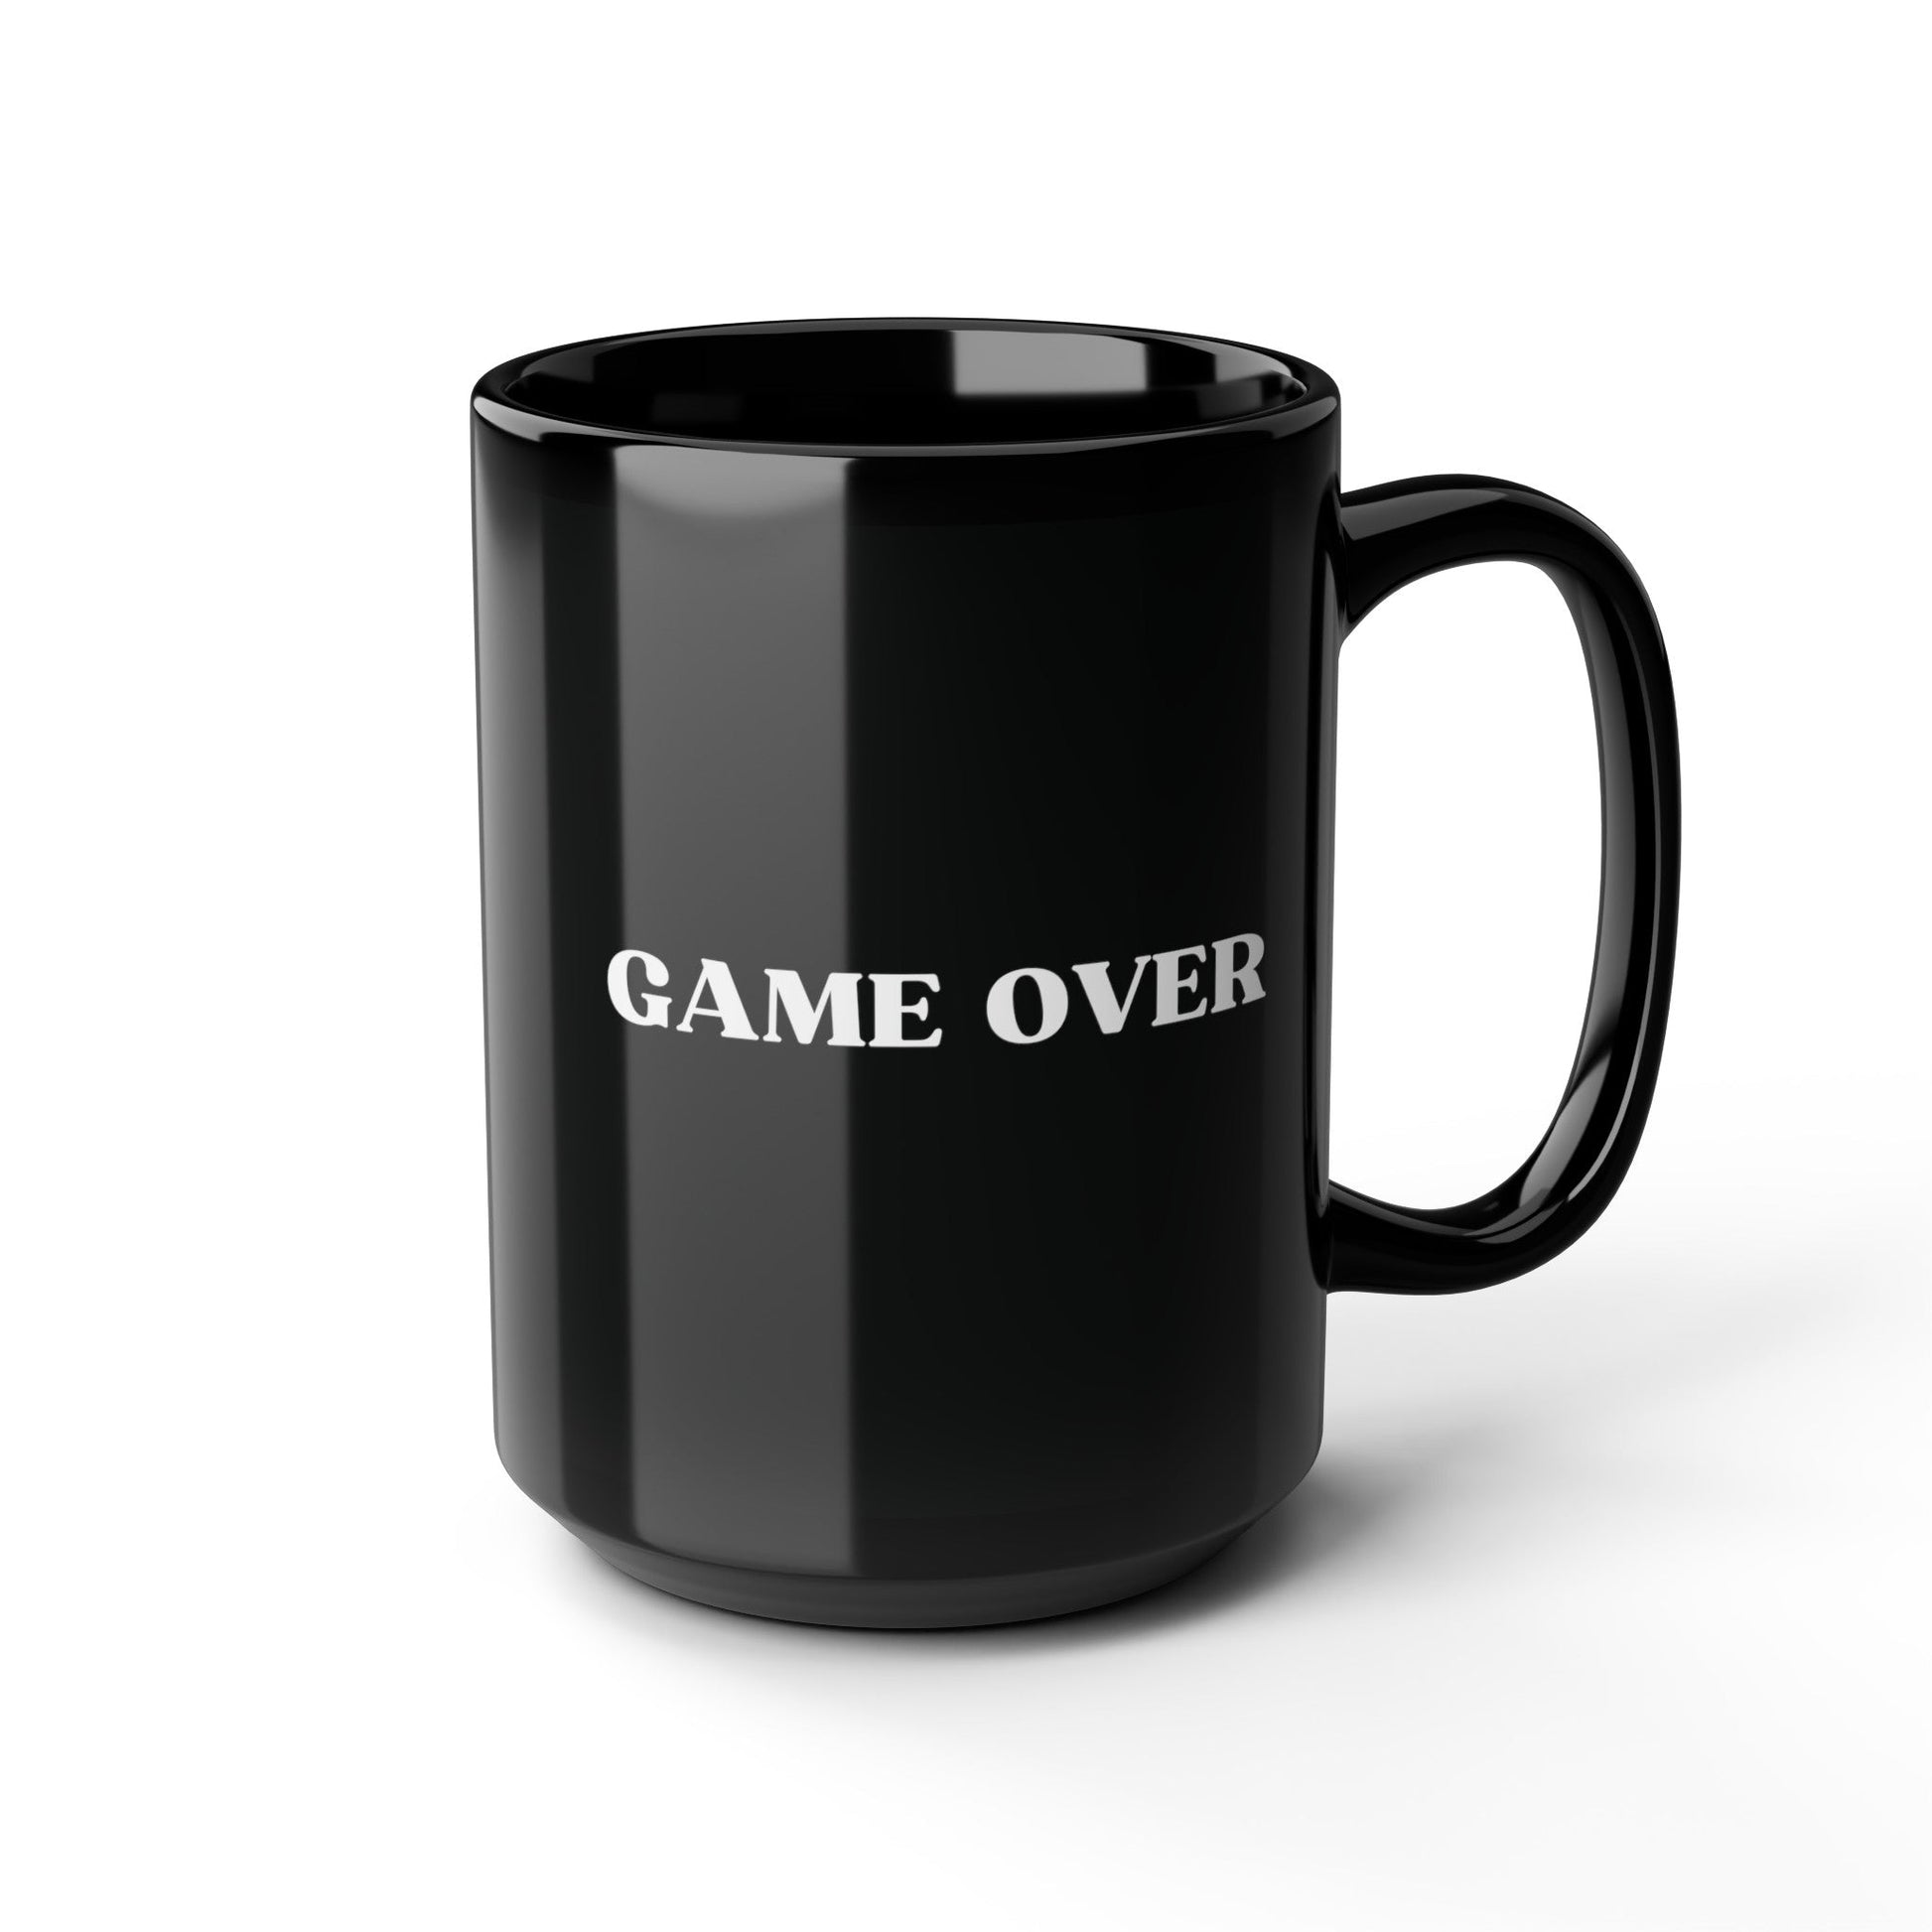 Game Over | Funny Gamer Inspired Cup, Video Game Coffee Cup, Office Or Geek Gift | Black Coffee Mug (11/15oz) - Moikas